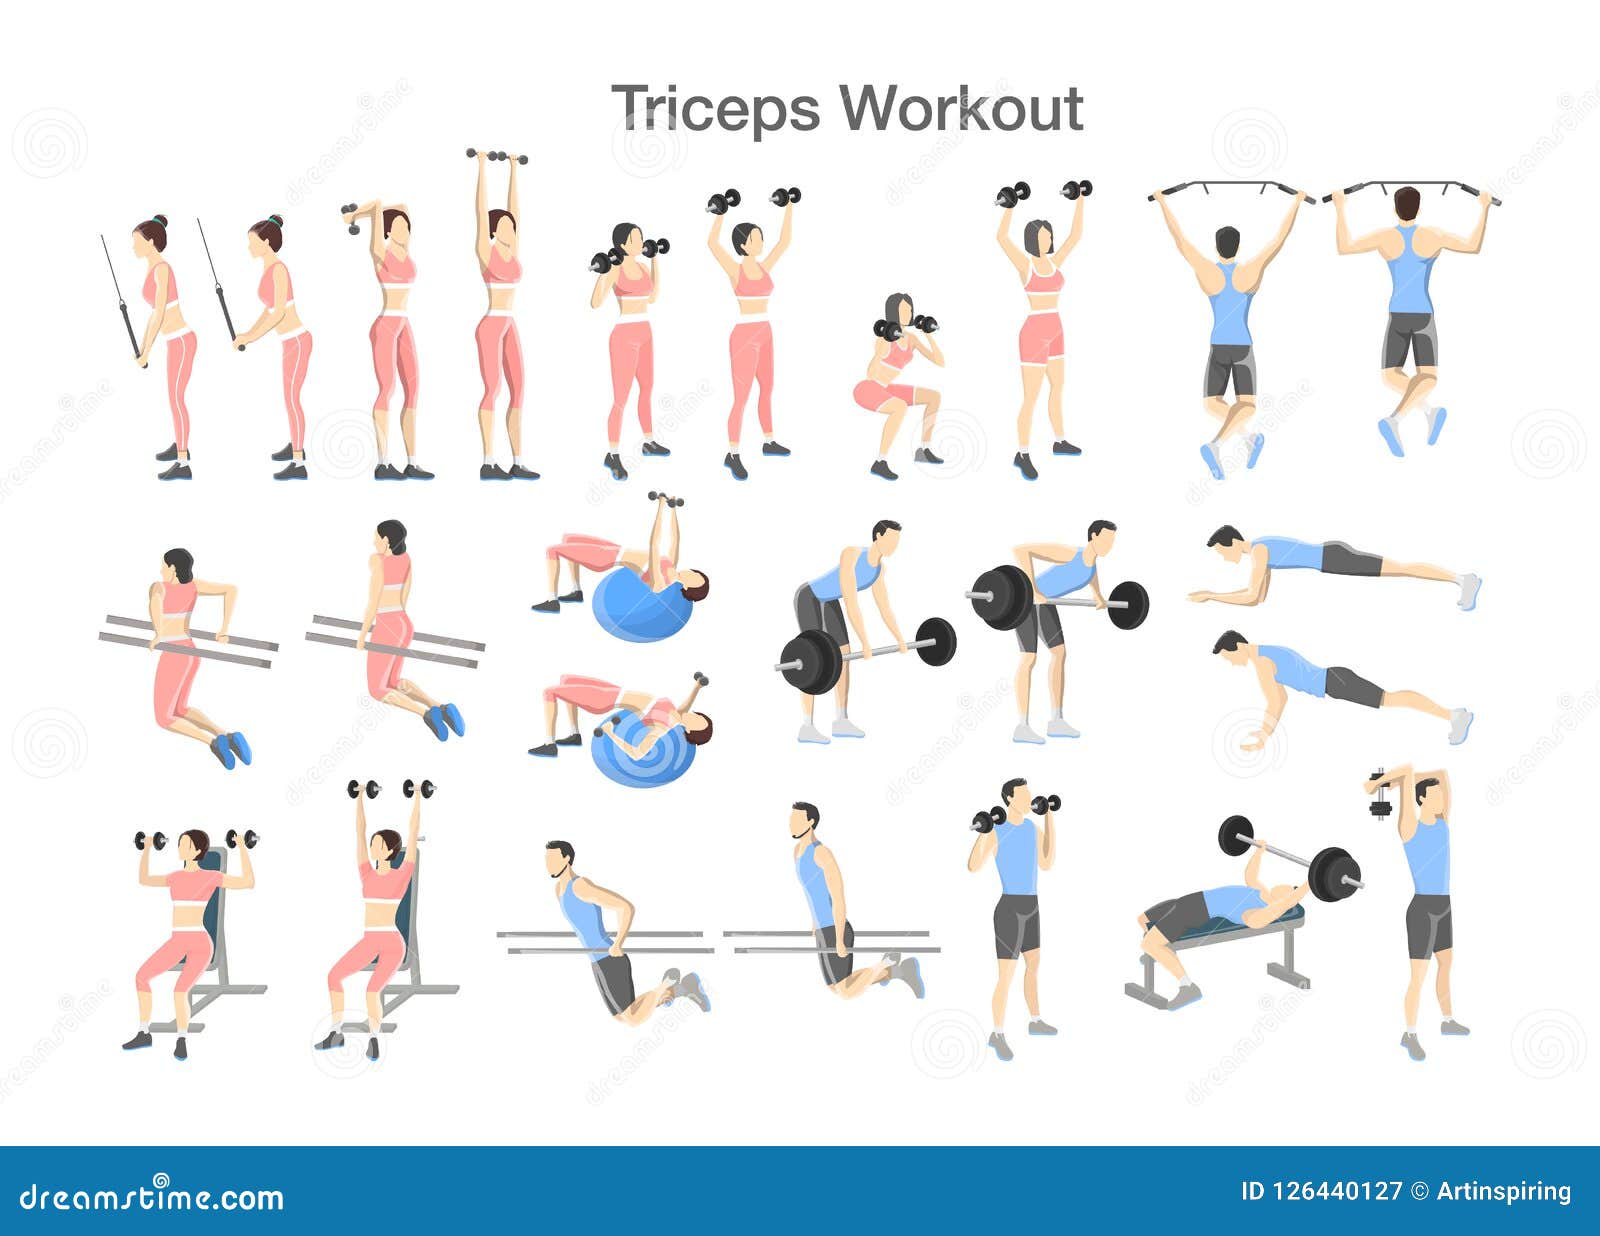 42+ Arm Workout Routine With Free Weights Gif